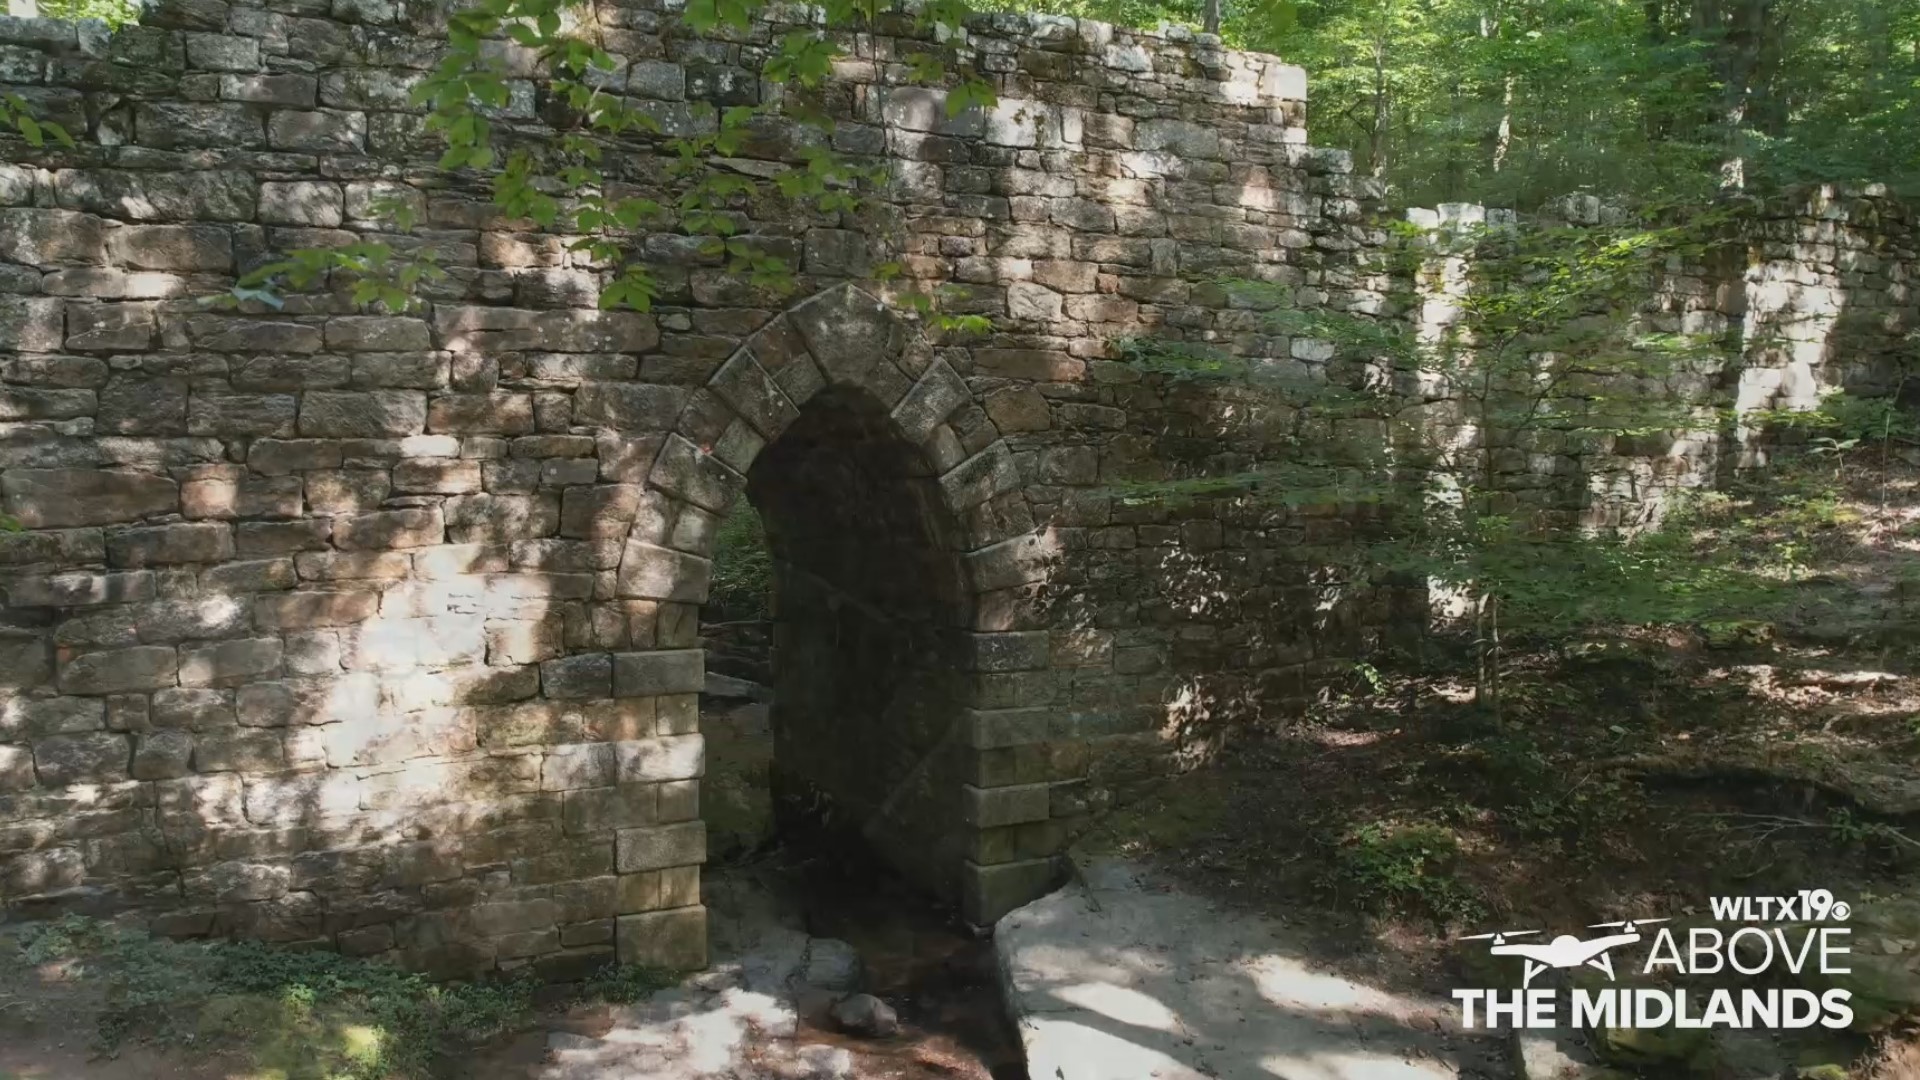 The Poinsett Bridge is located in Greenville County, South Carolina. It's the oldest bridge in the state.